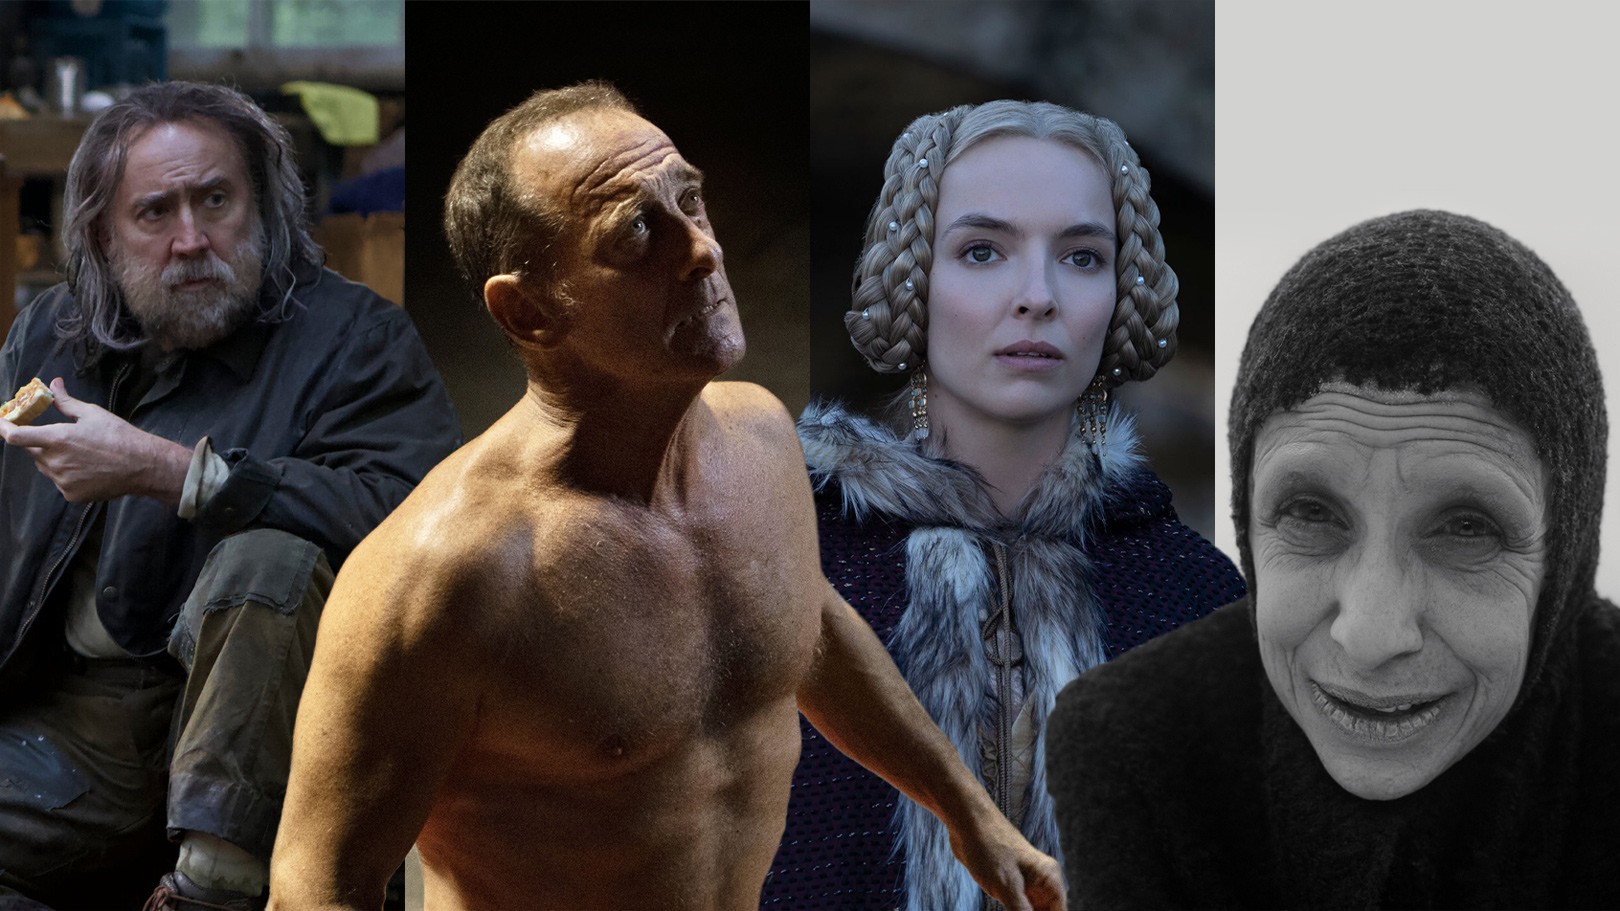 Oscar's X-Rated Past! The 13 Academy Award Nominations For X-Rated Films  With An Awards Edge!